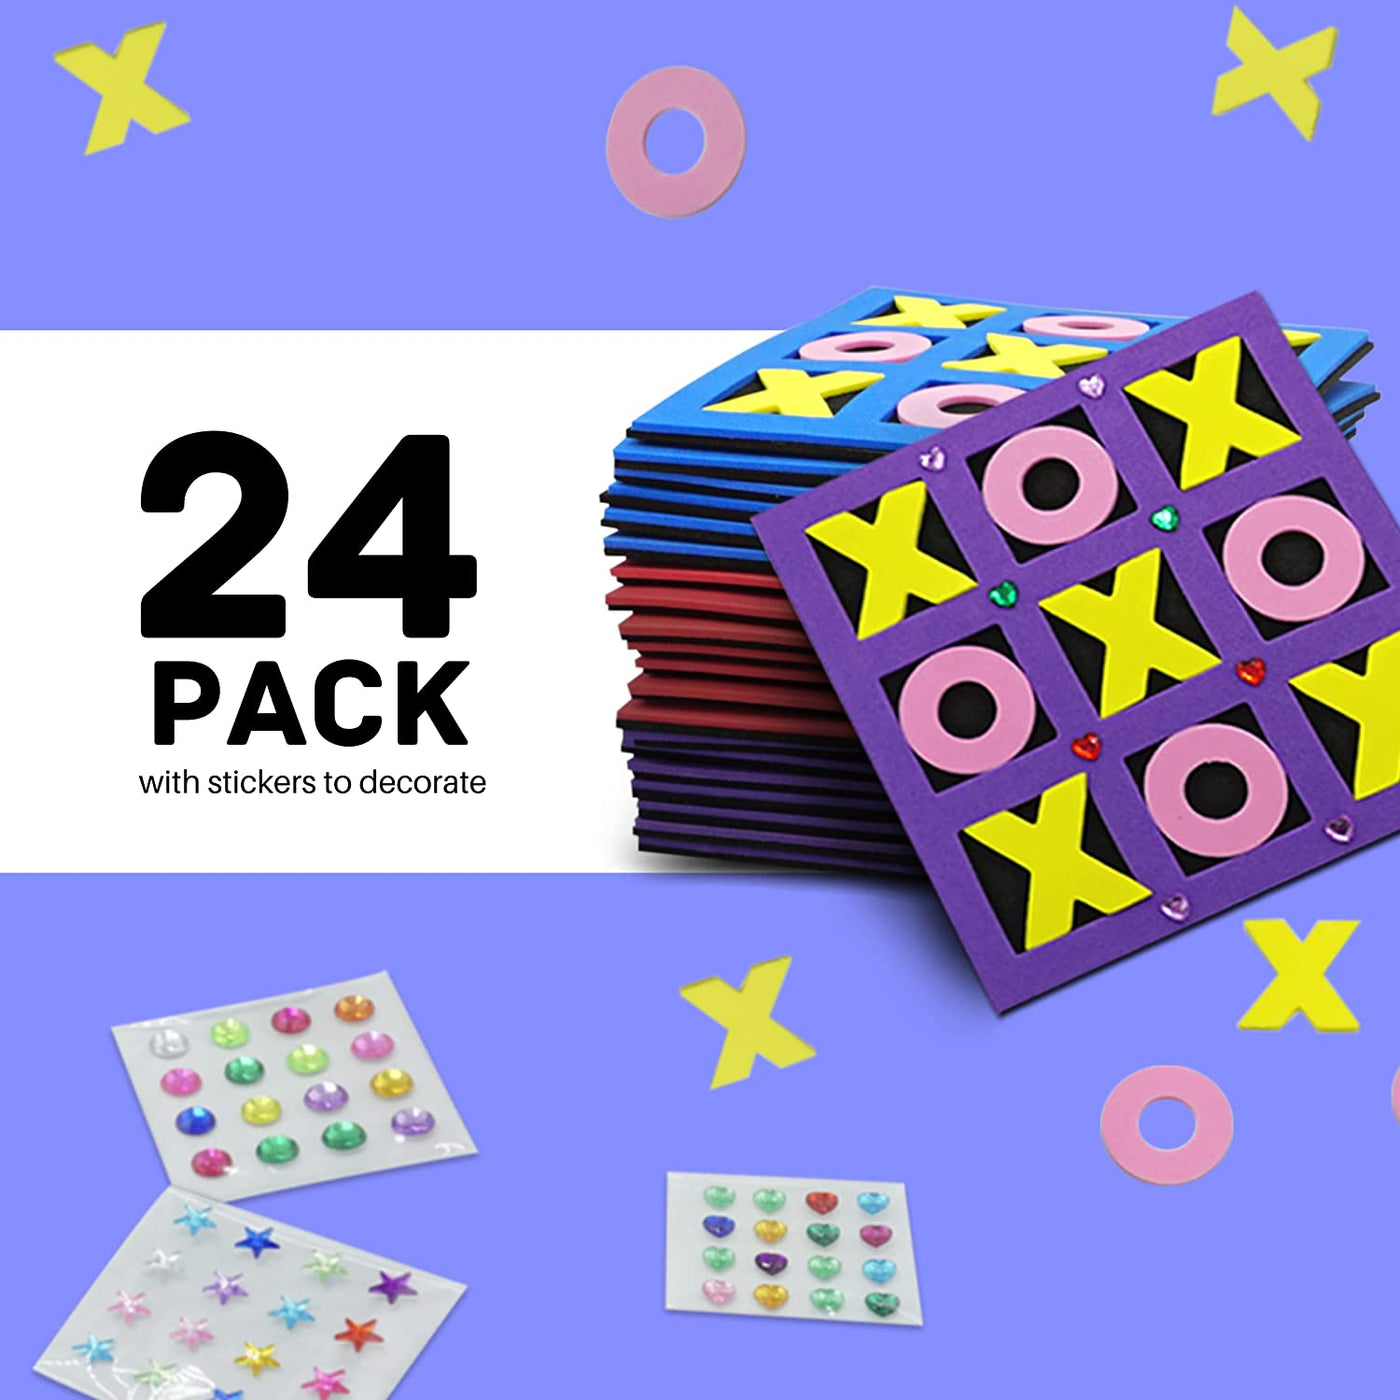 Foam Tic Tac Toe Game [24 Pack] for Kids Individually Wrapped Party Favors, Goody Bag Fillers, Classroom Valentines Day Gifts for Kids